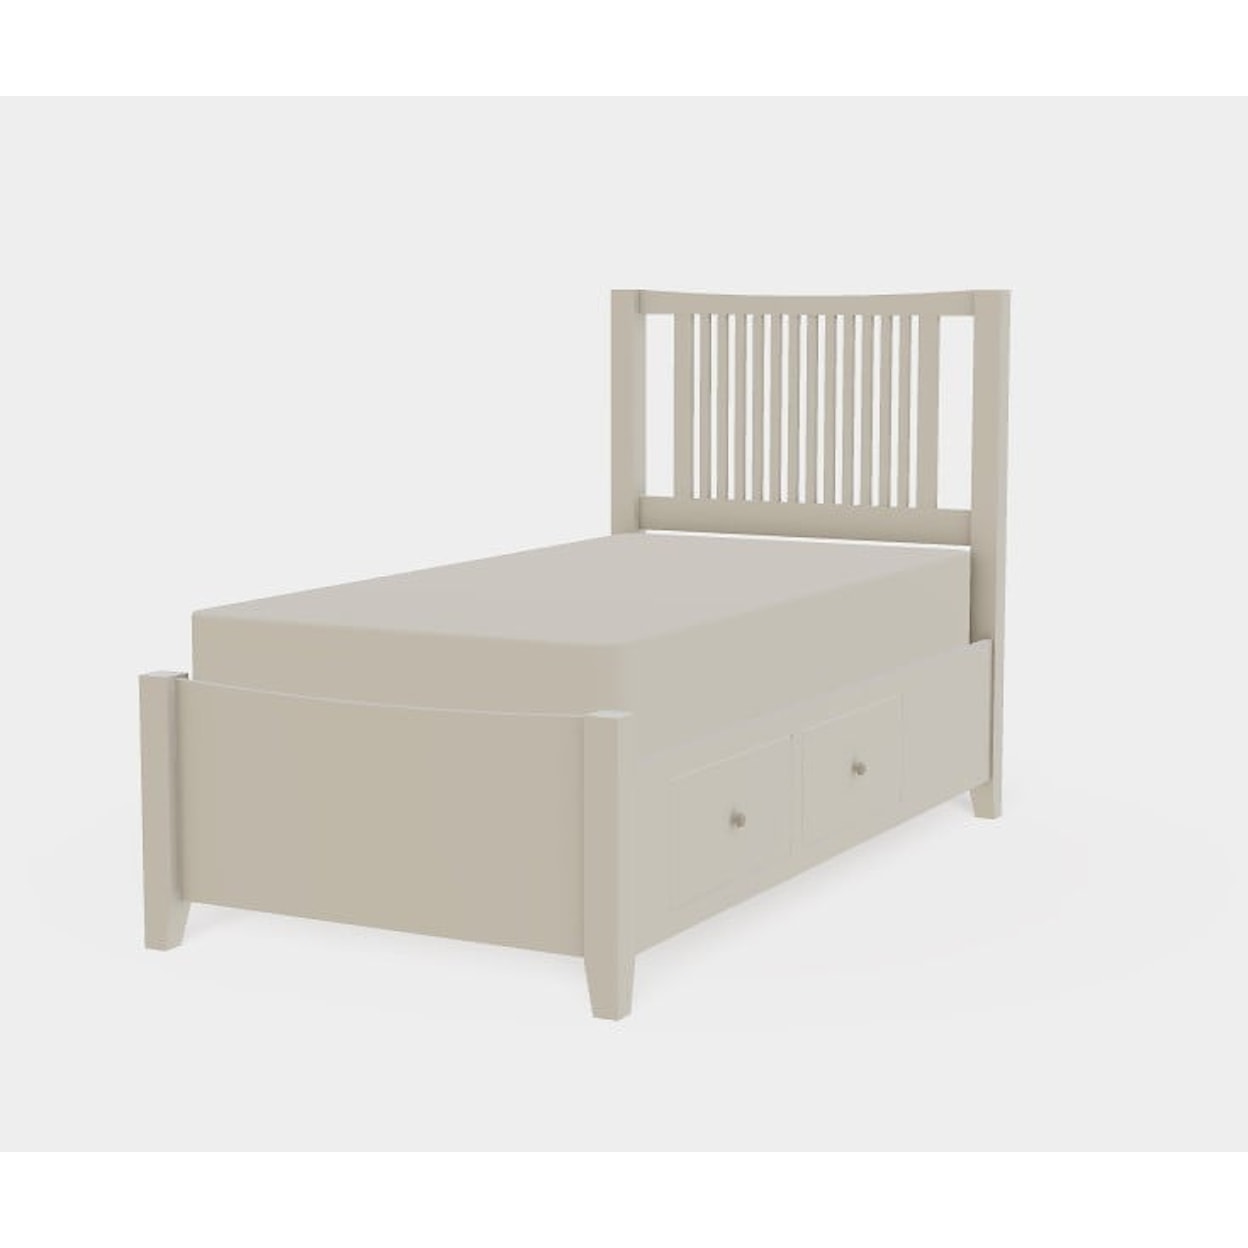 Mavin Atwood Group Atwood Twin XL Right Drawerside Spindle Bed